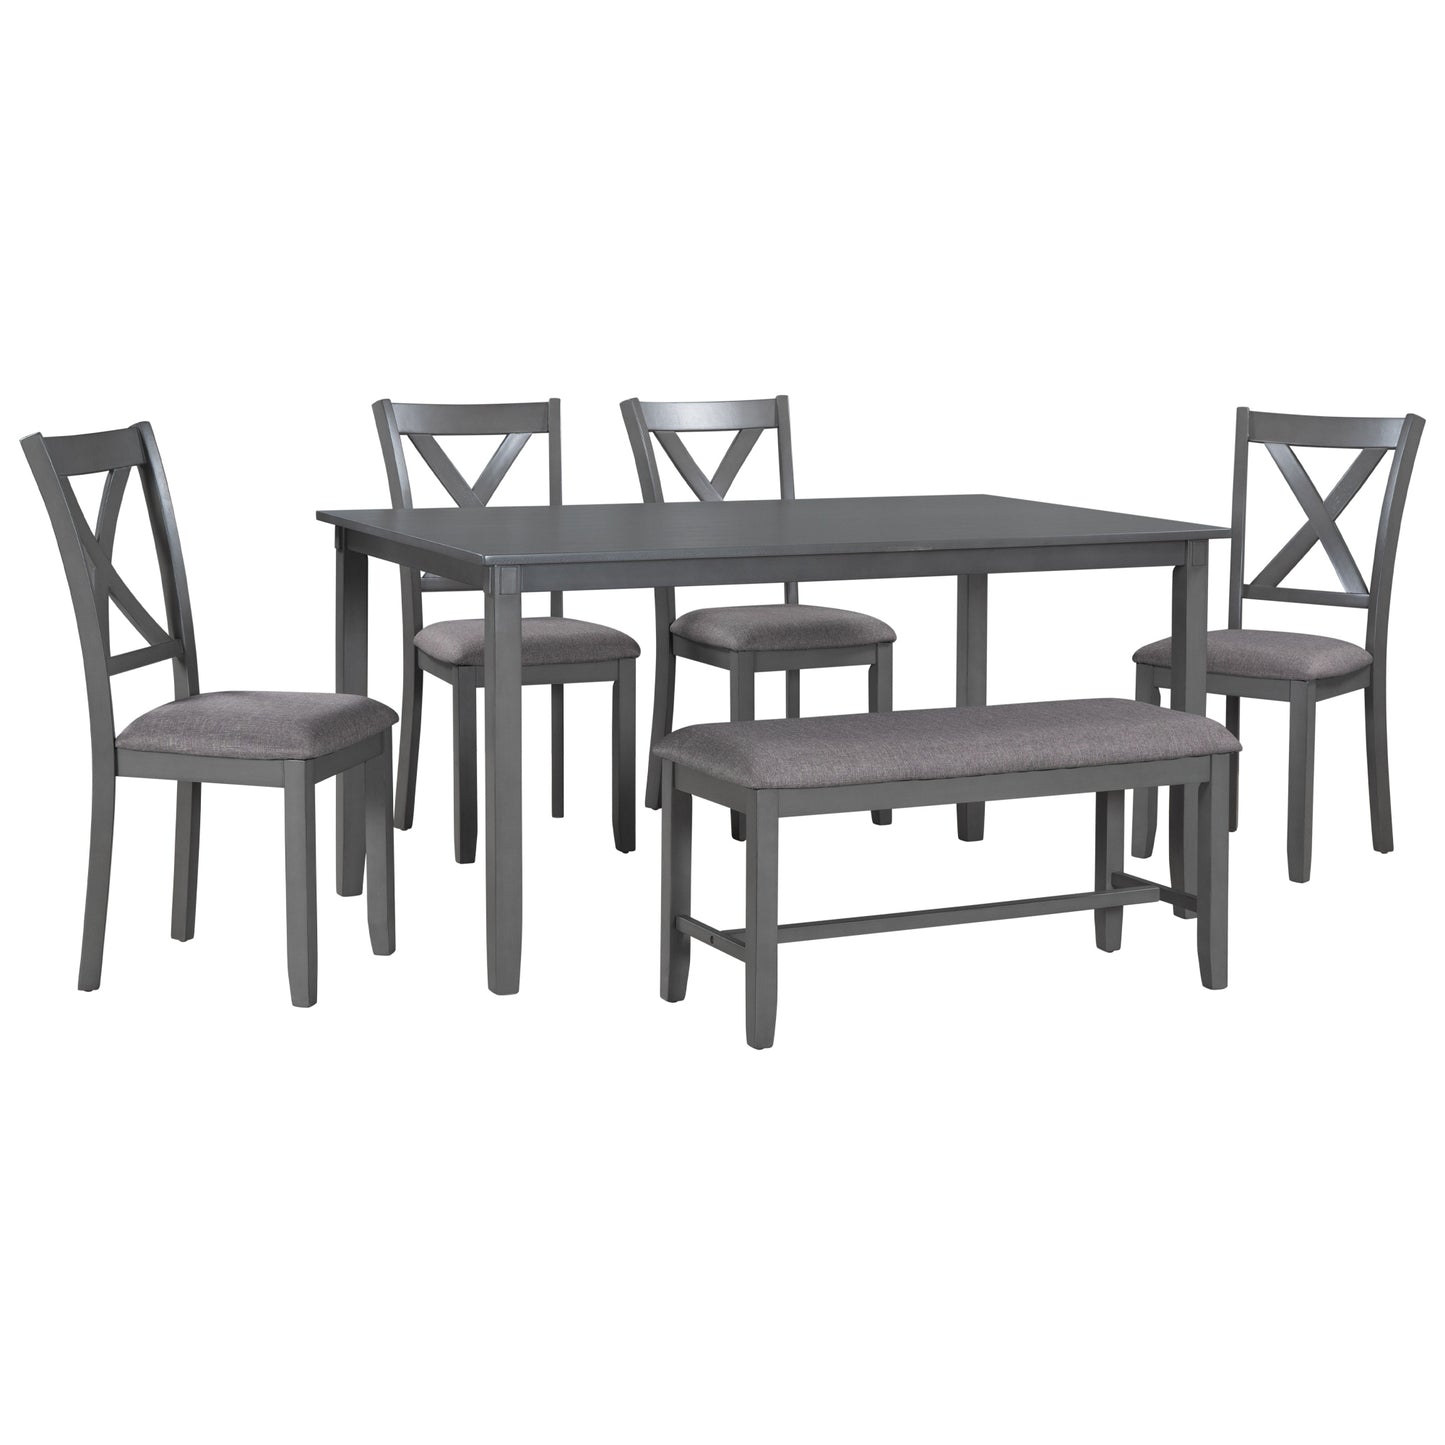 TREX 6-Piece Kitchen Dining Table Set Wooden Rectangular Dining Table